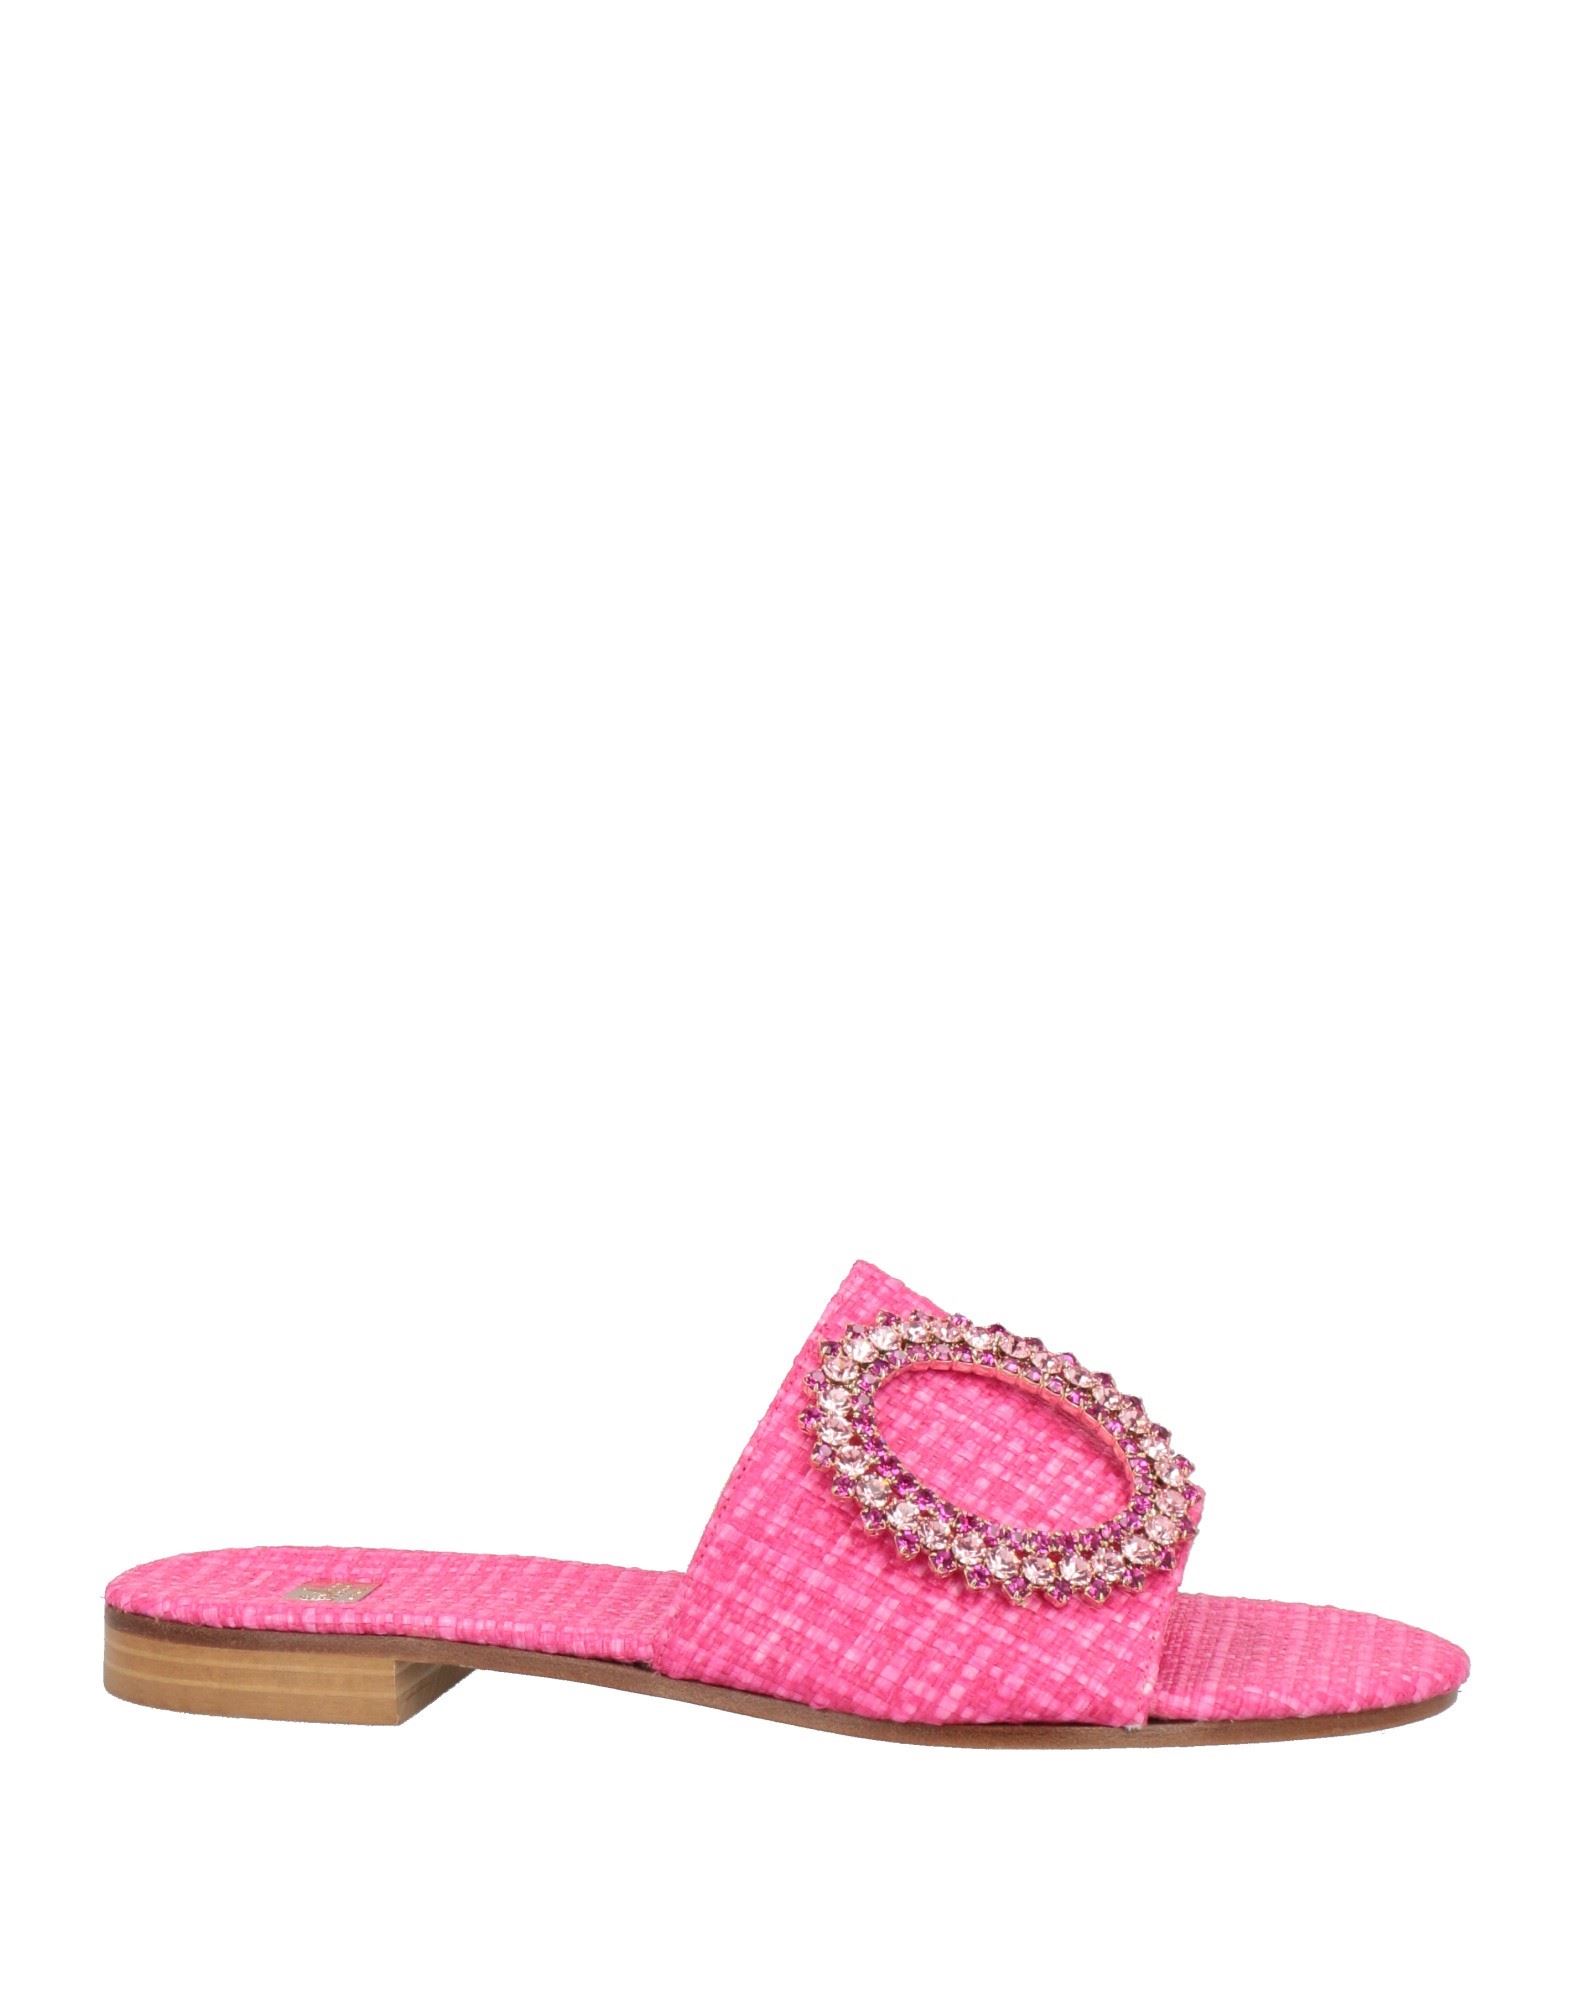 Soleae Sandals In Pink